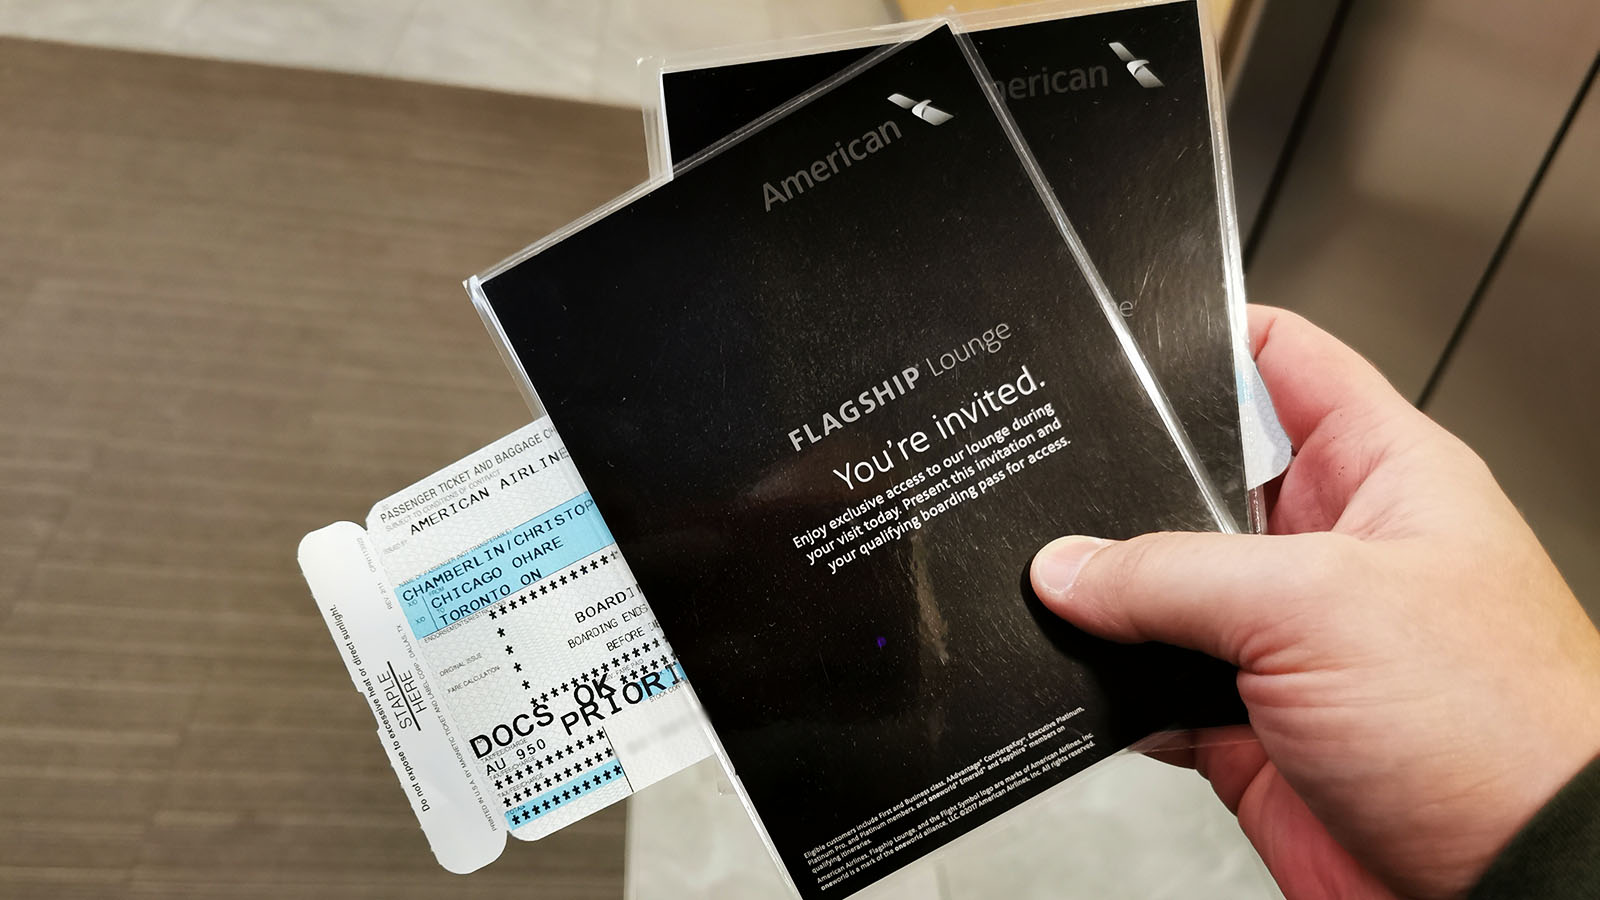 Flagship Lounge invitations at Chicago O'Hare